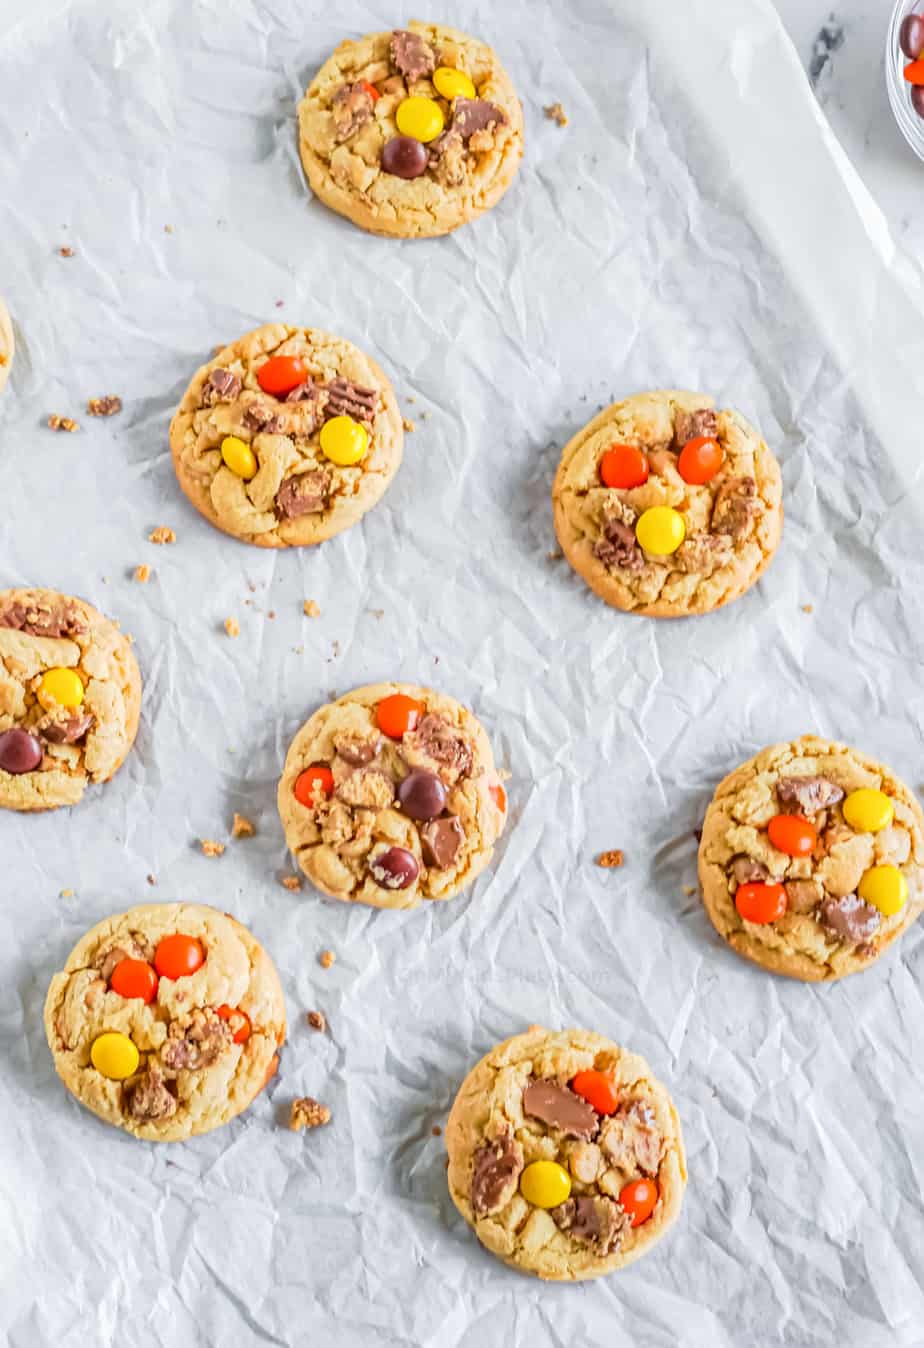 Cookies baked on the pan with peanut butter cups and Reese's pieces pressed into the top of the cookies.